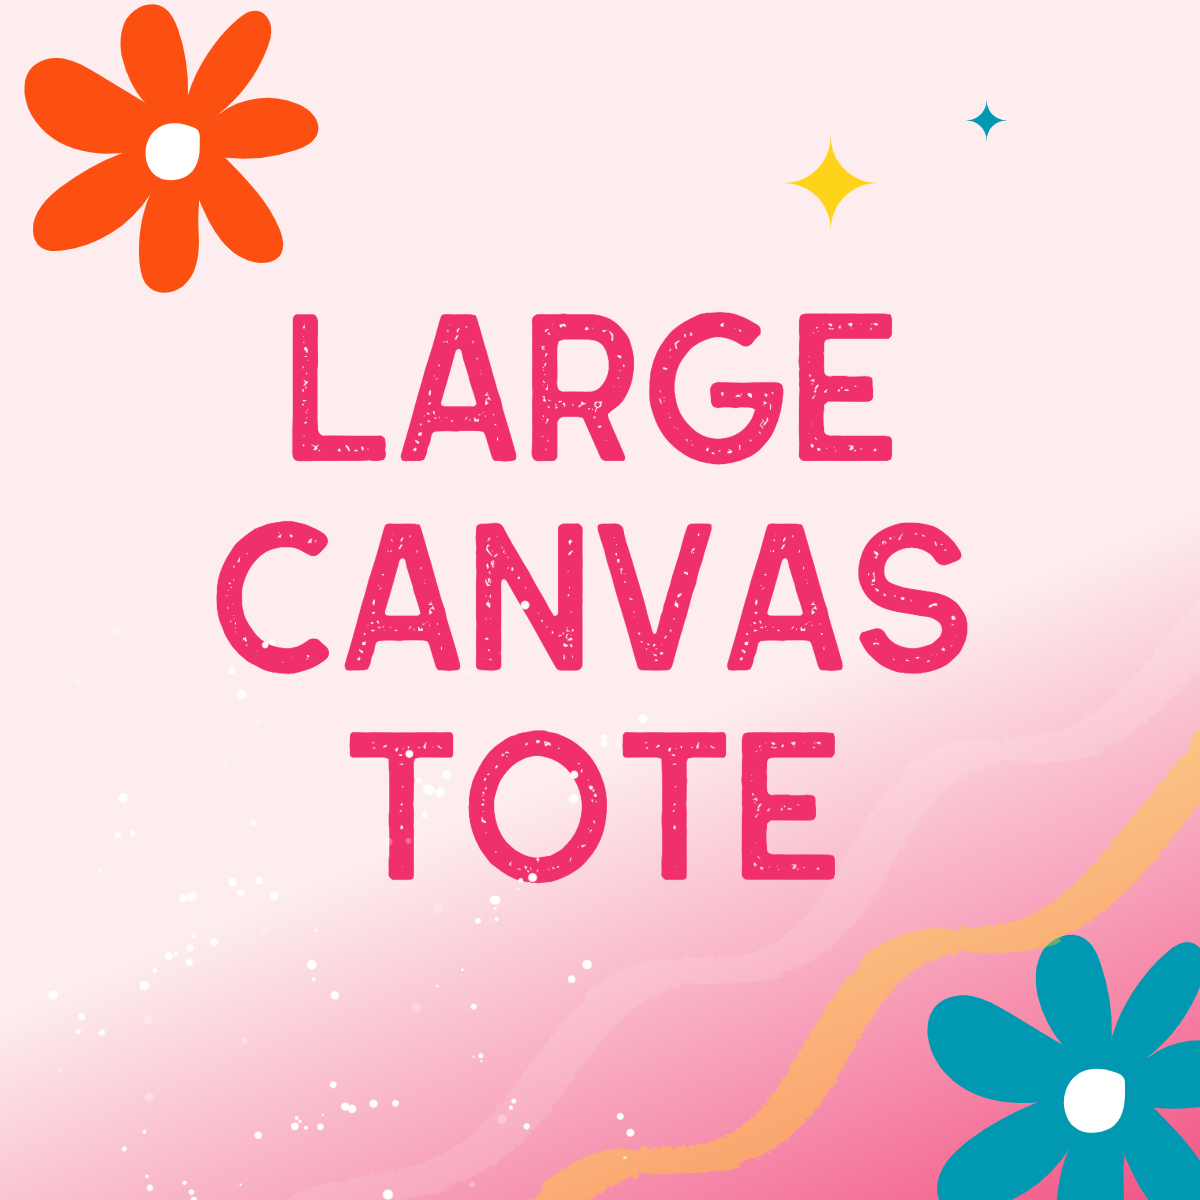 Large Canvas Tote (LCT0001)